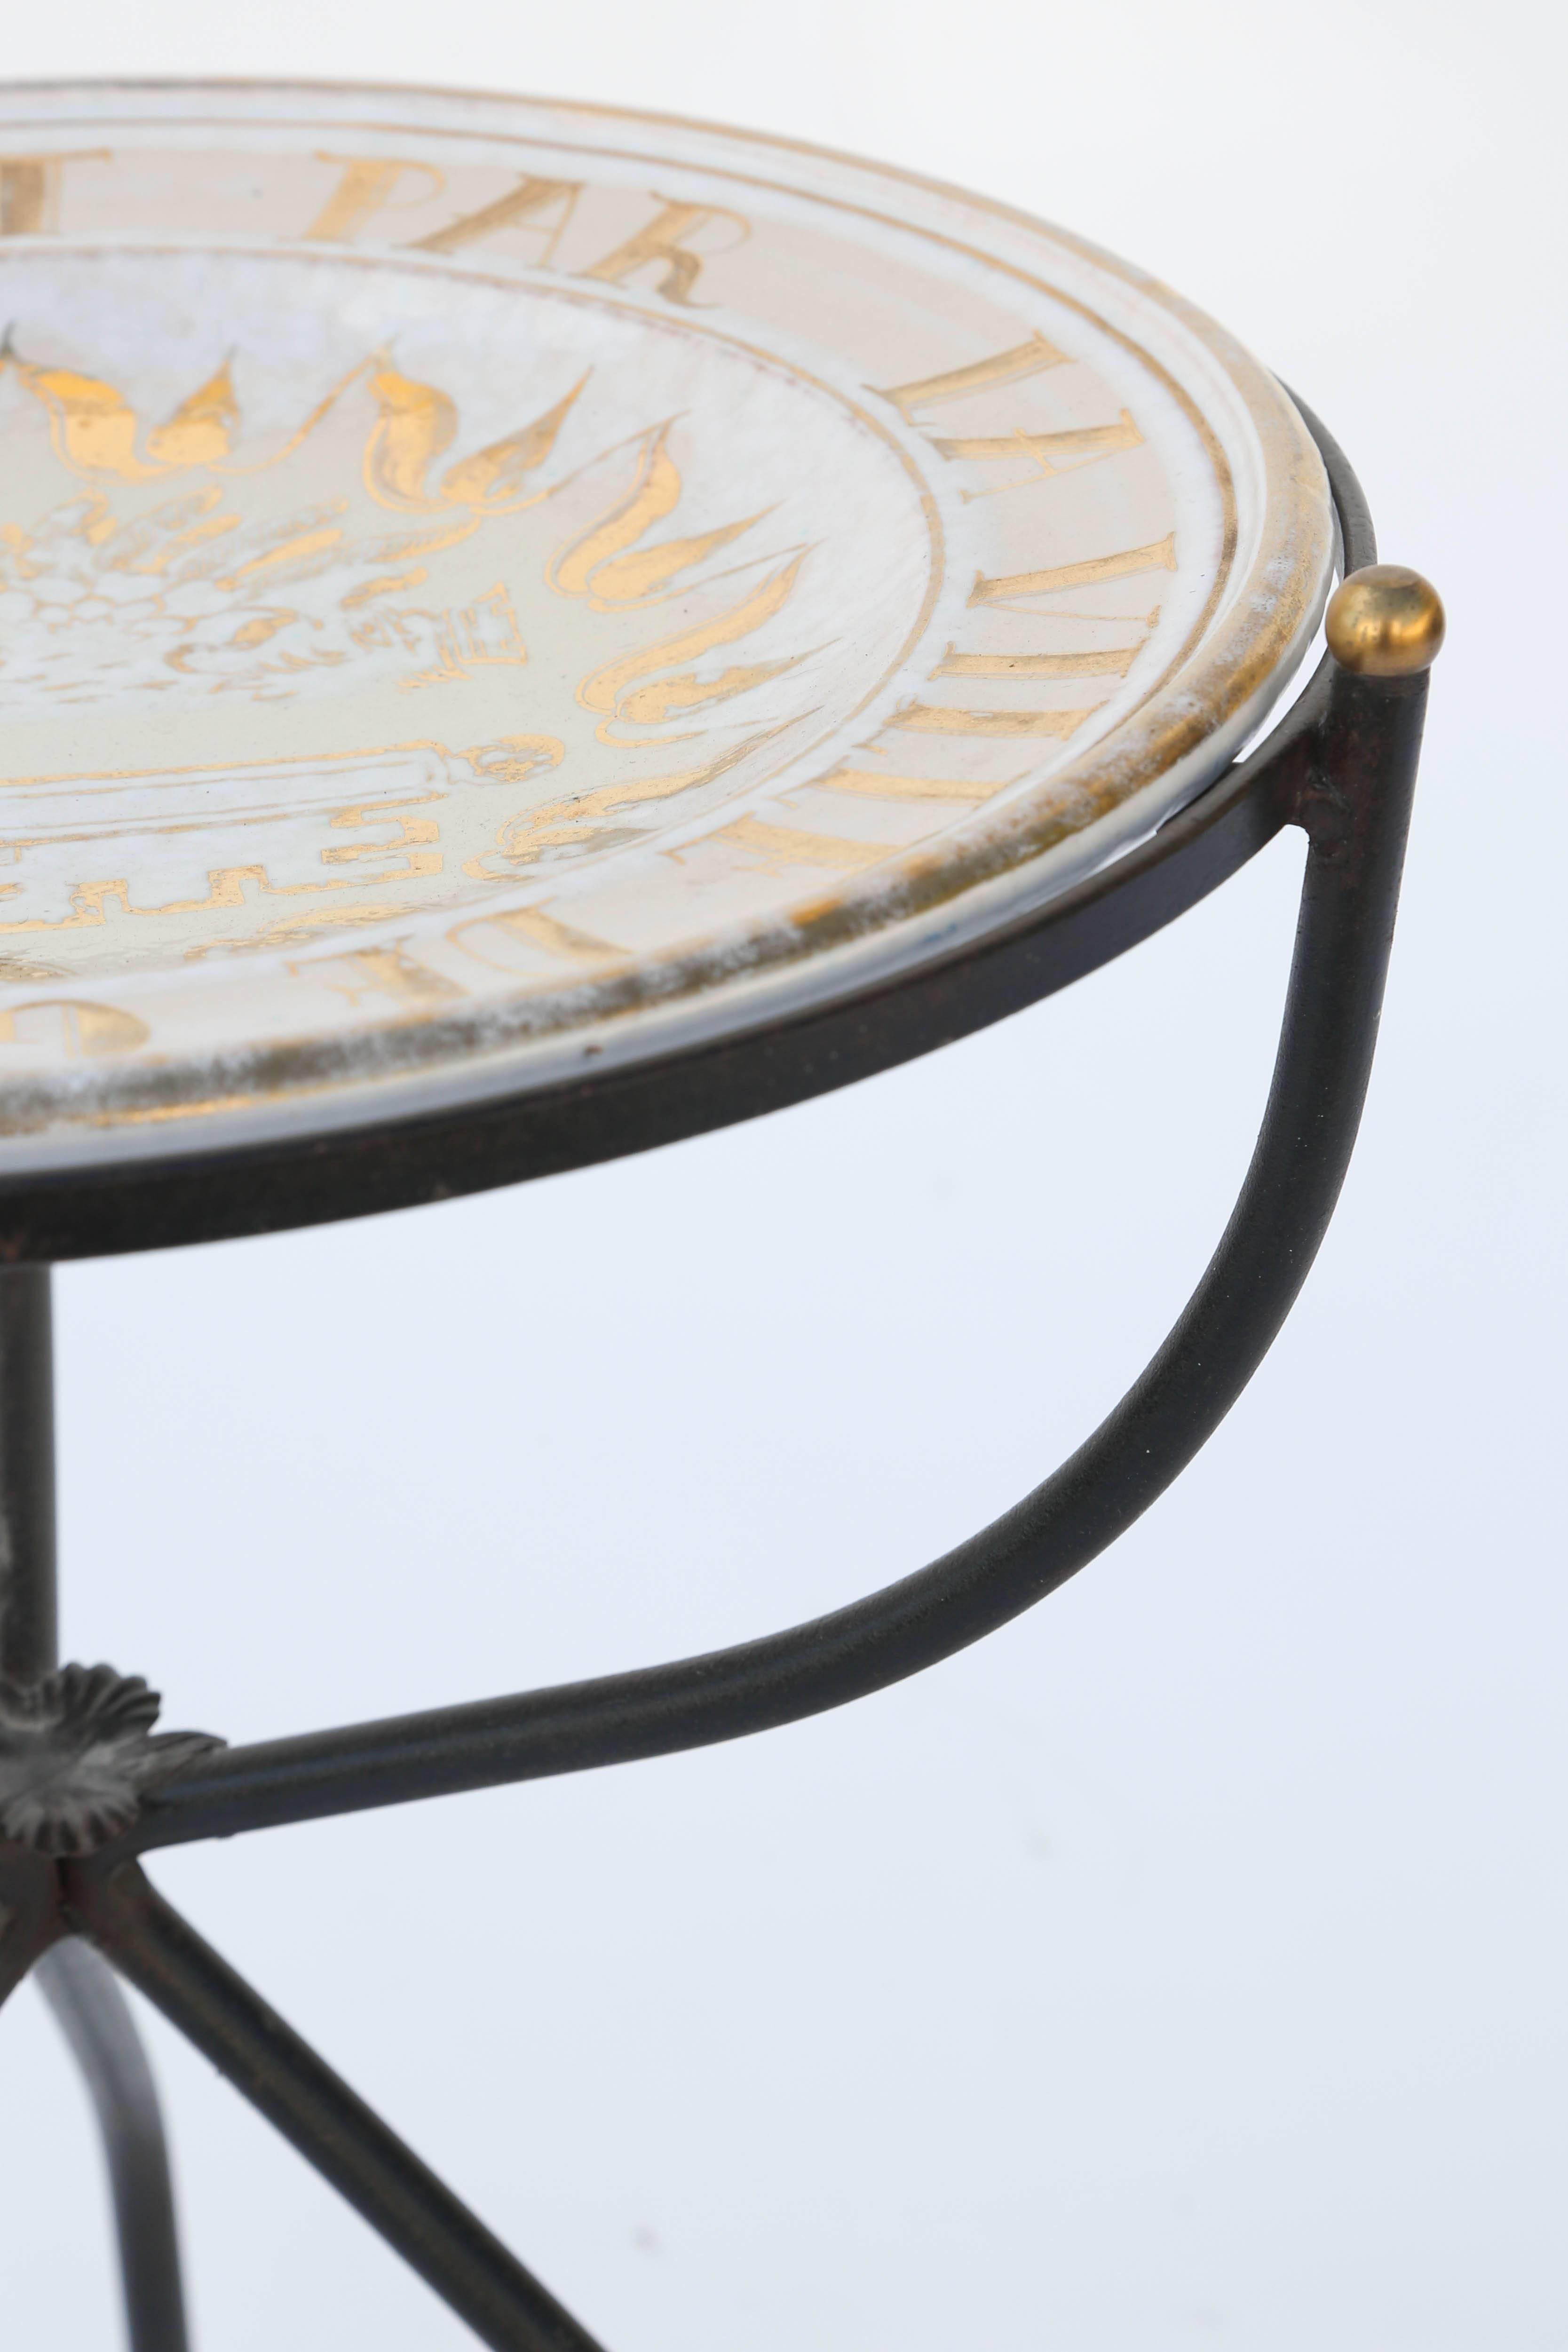 Swiss Iron Accent Table with Glazed Terracotta Charger Top For Sale